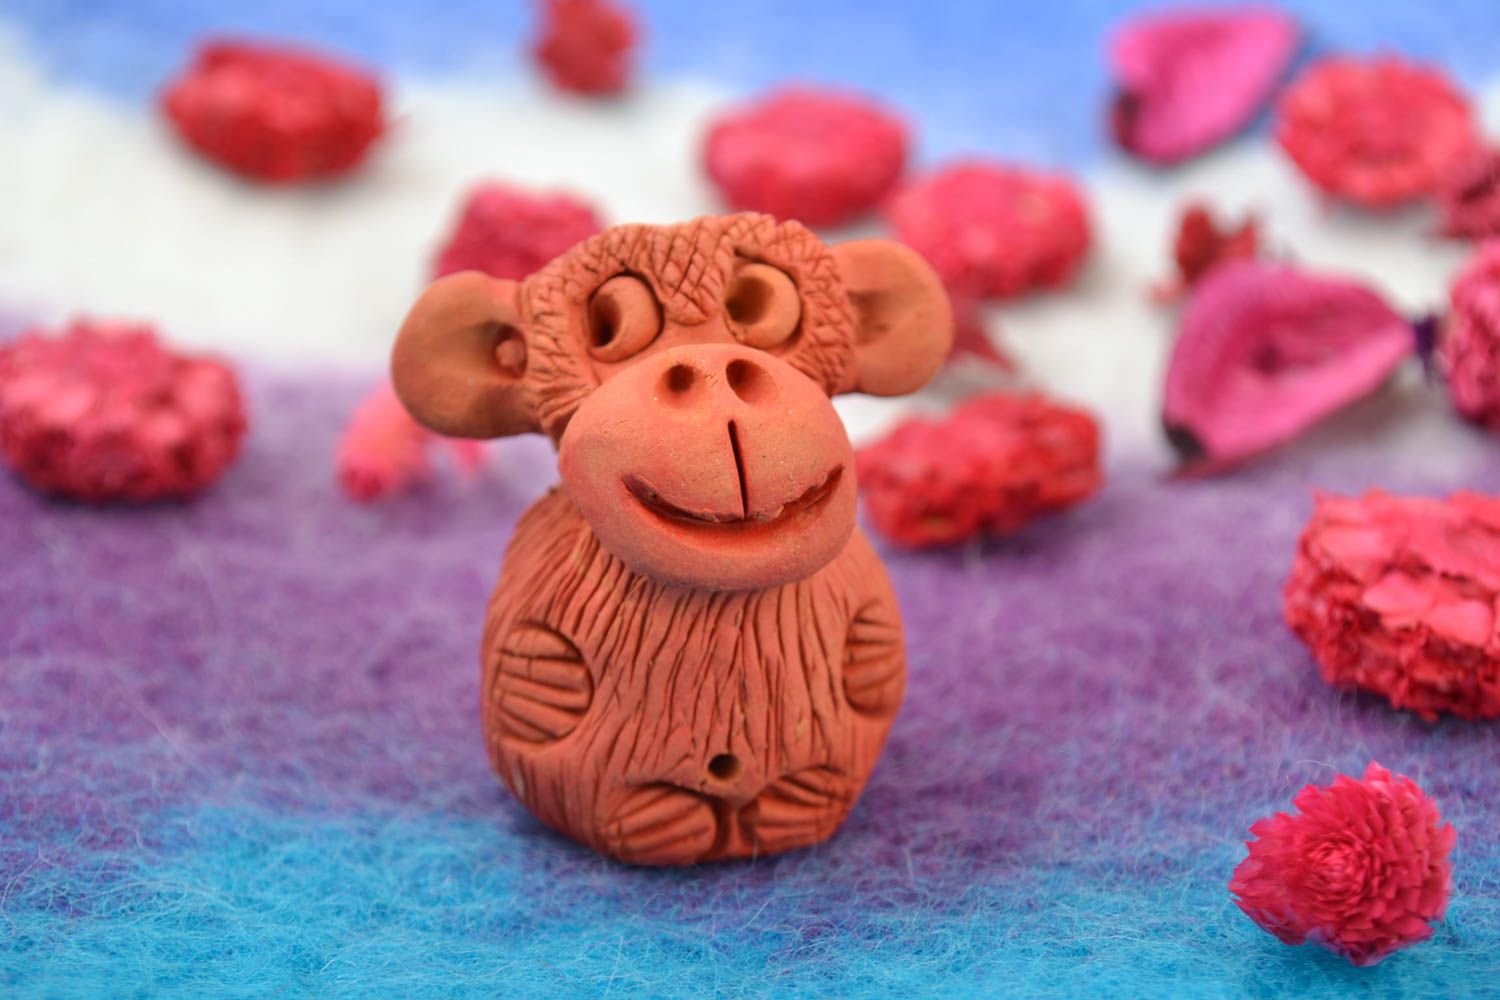 Ceramic statuette of monkey made of red clay handmade decorative home figurine photo 1